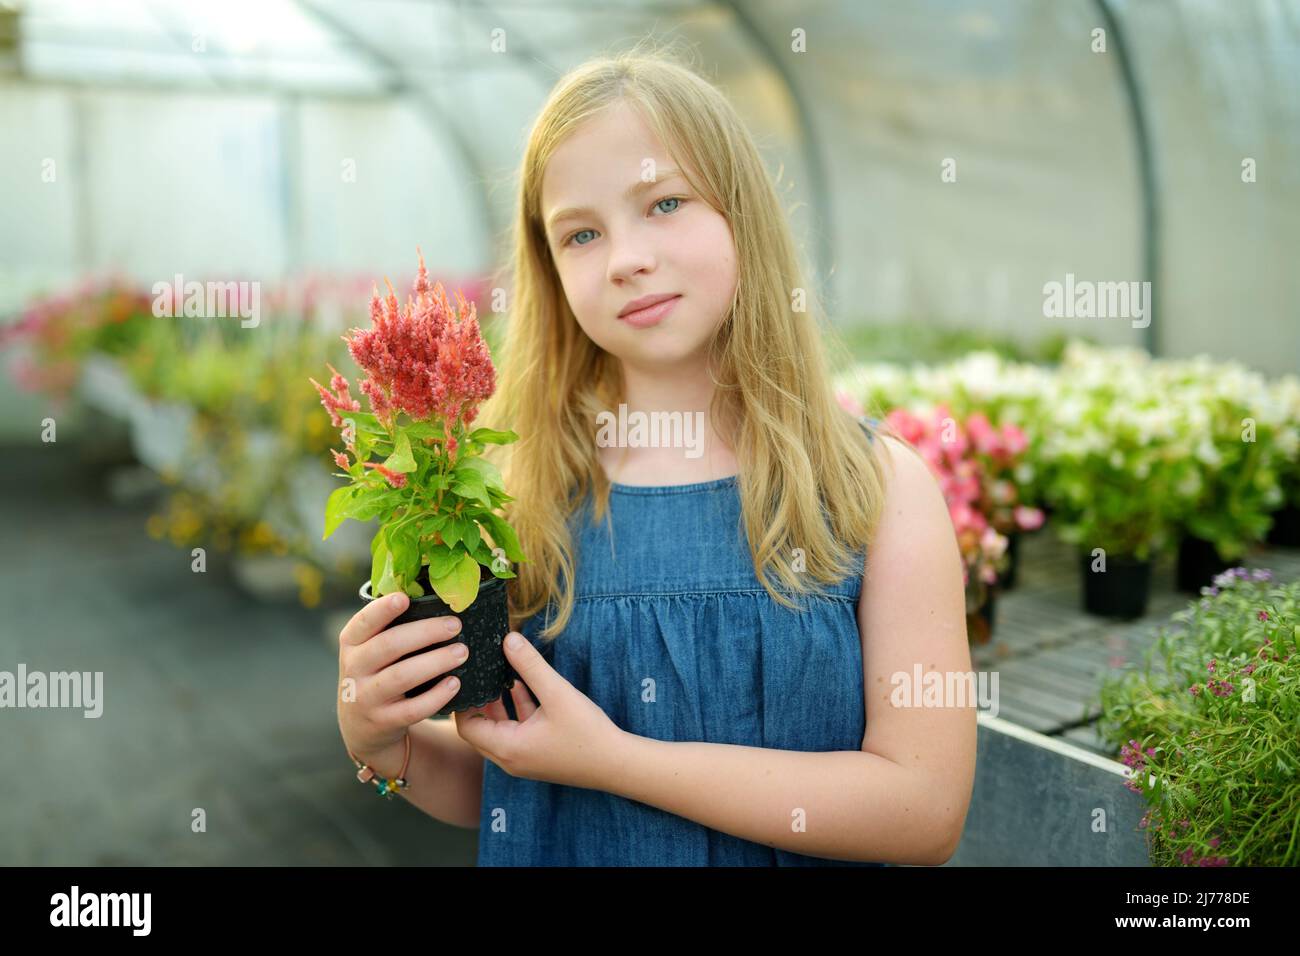 Pretty young girl holding colorful begonia plant in a pot. Flowers for sale in greenhouse. Red and pink begonia with green leafs. Stock Photo